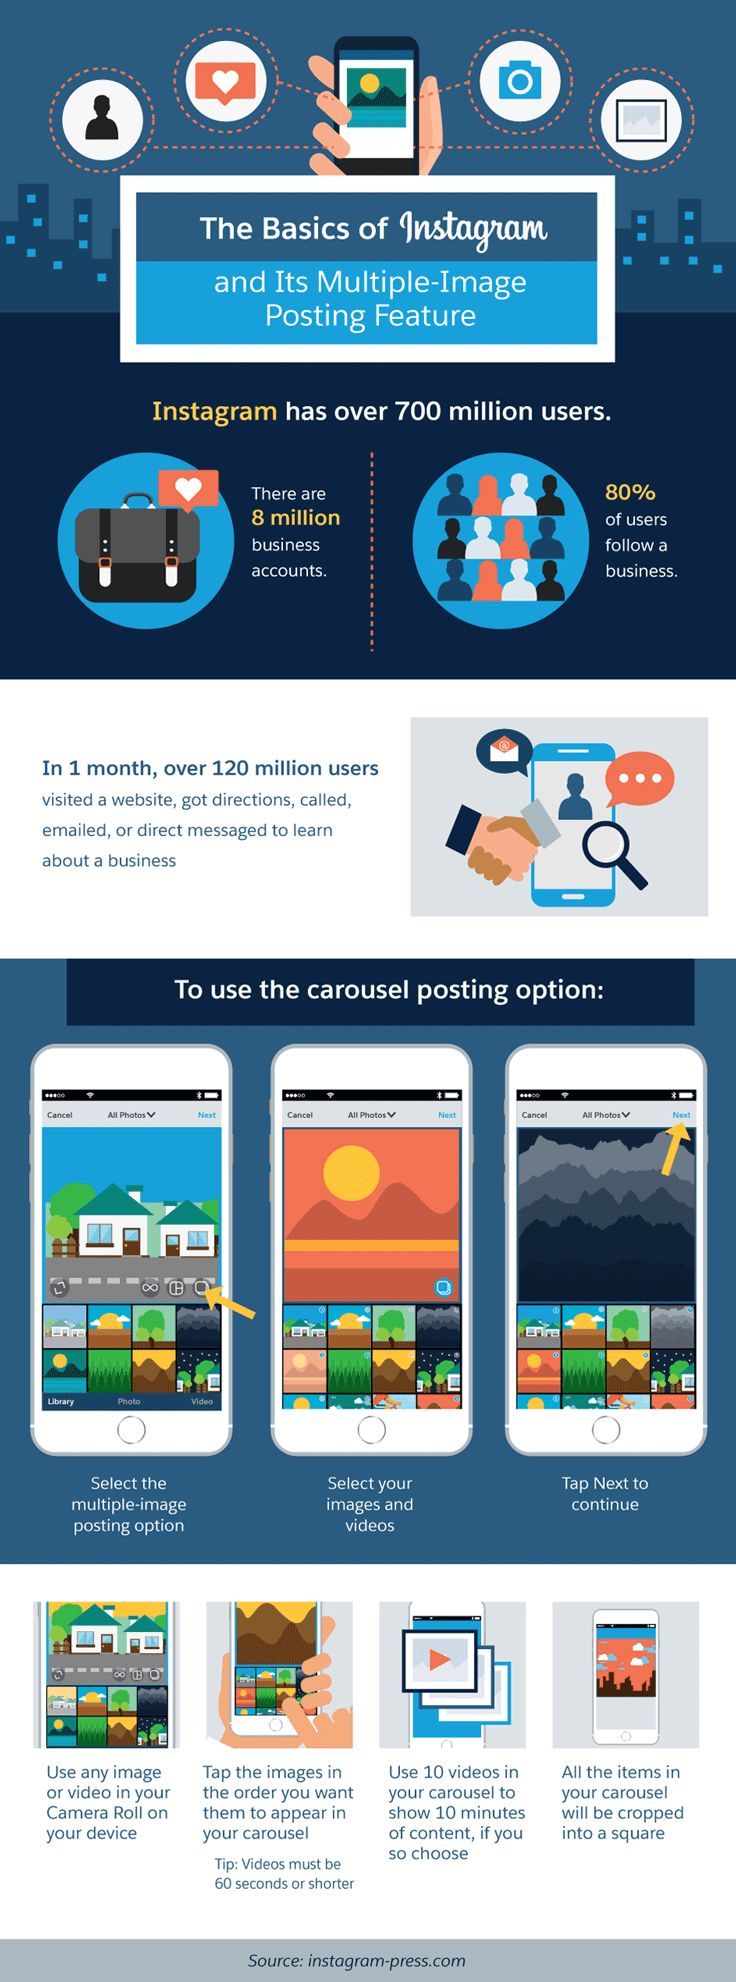 Marketing-Infographic-Instagram-marketing-tips-Carousel-feature-lets-you-combine-up-to-10-images-in-a Marketing Infographic : Visual marketing tips: Instagram's Carousel feature lets you combine up to 10 im...